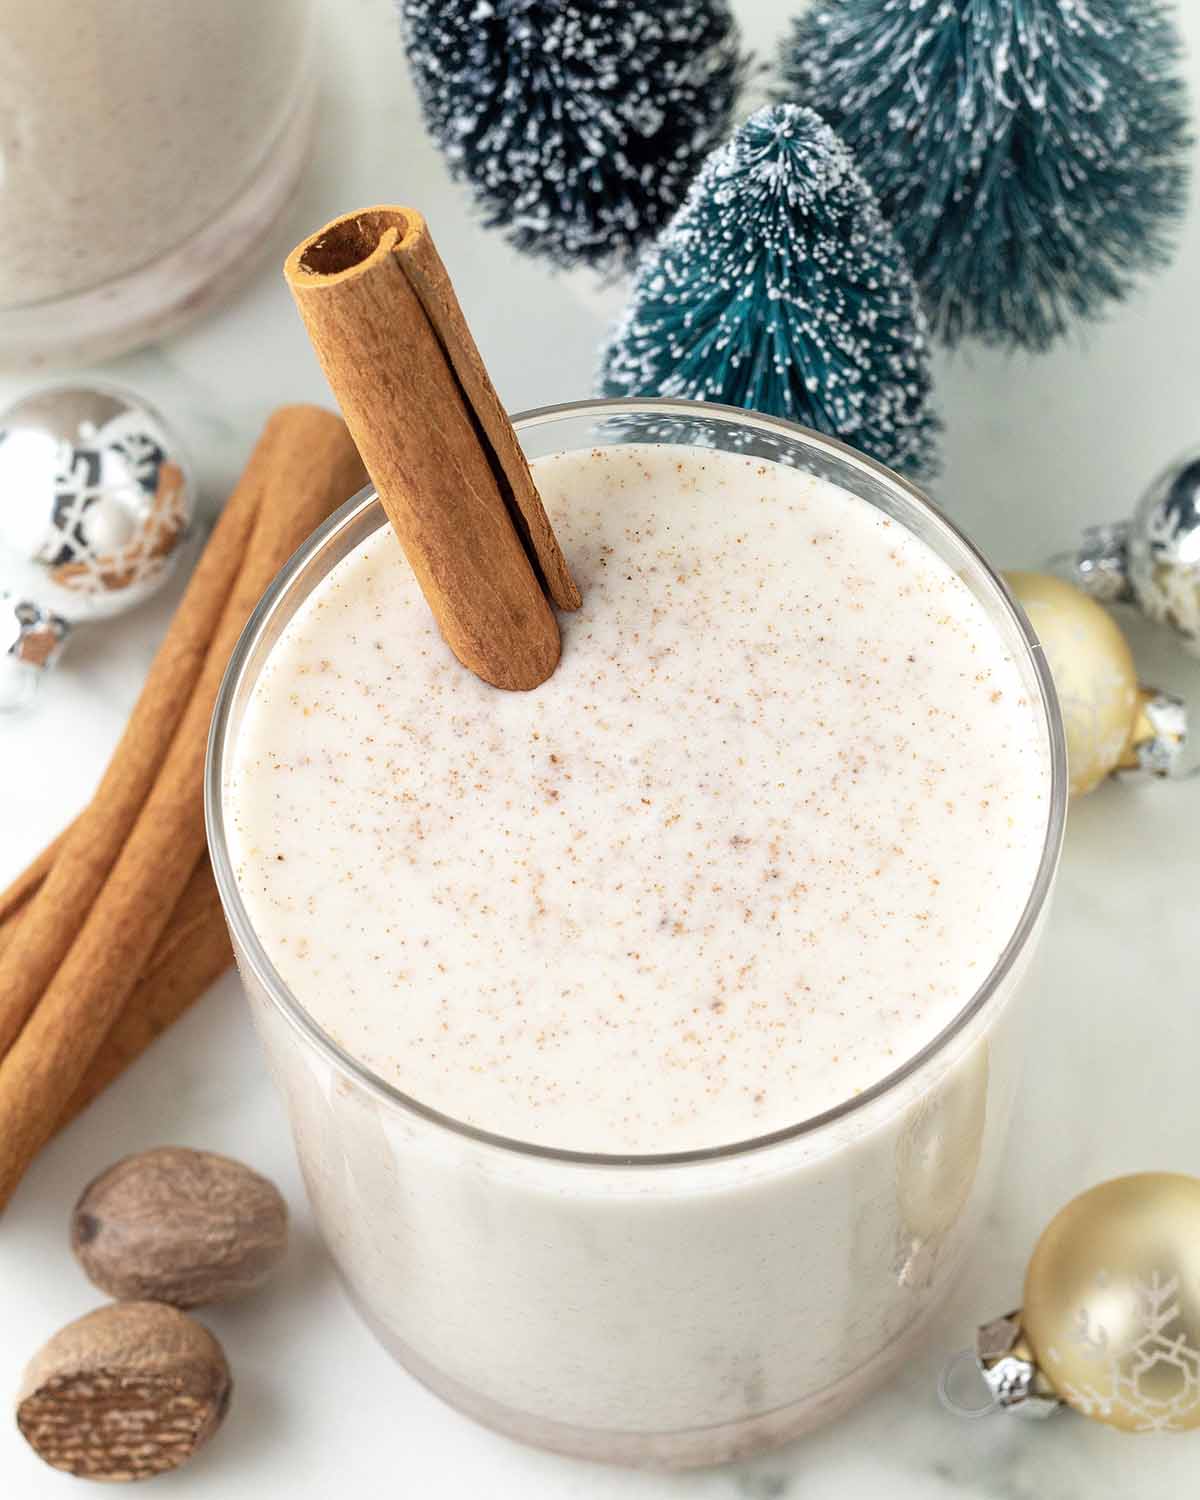 An overhead image of almond milk eggnog in a glass, the glass has a cinnamon stick in it and is surrounded by decorations.